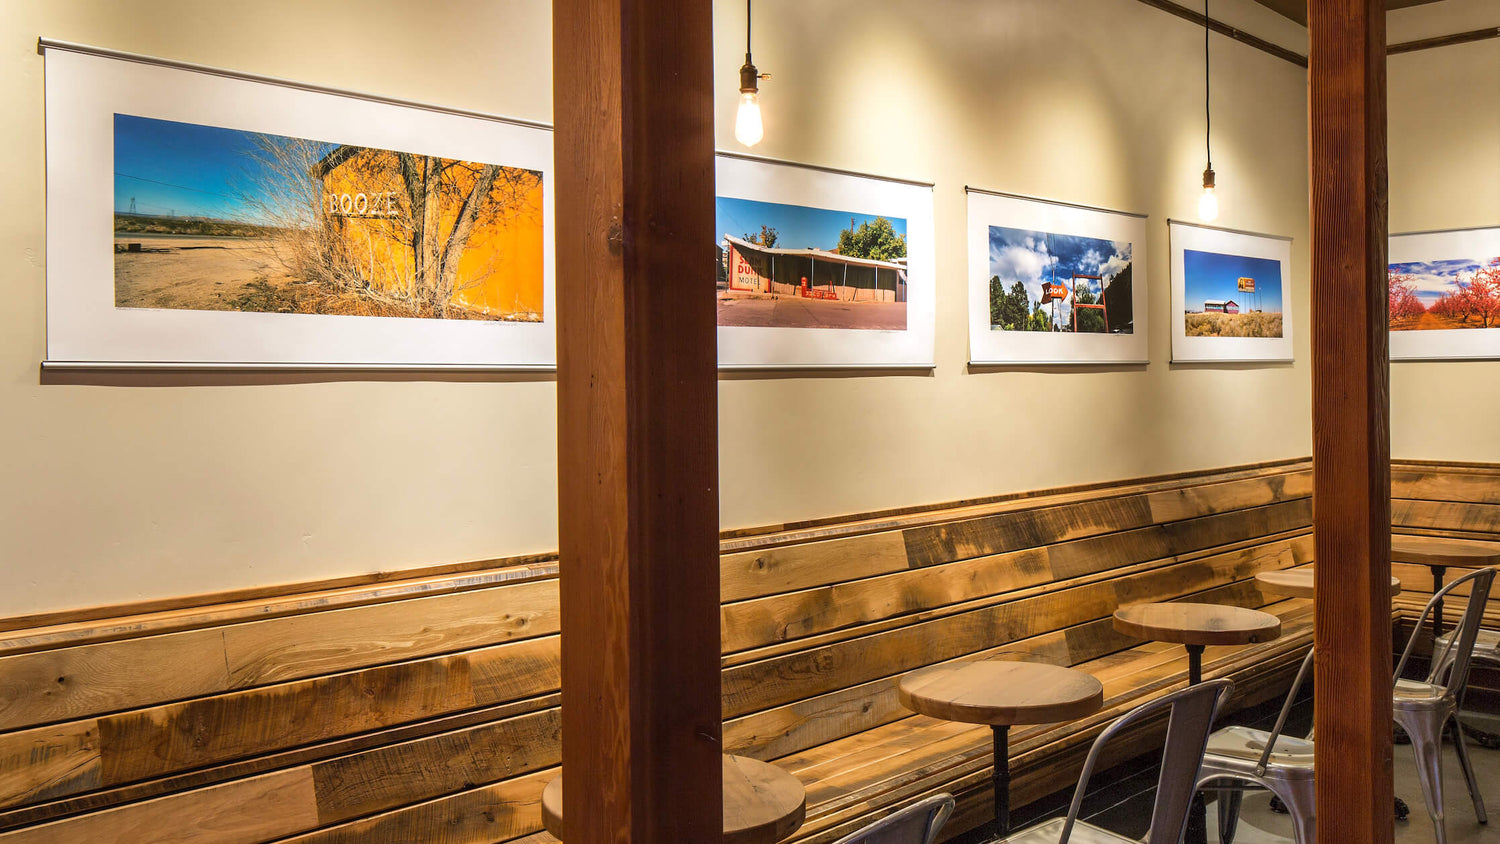 Photo exhibition installed in a cafe